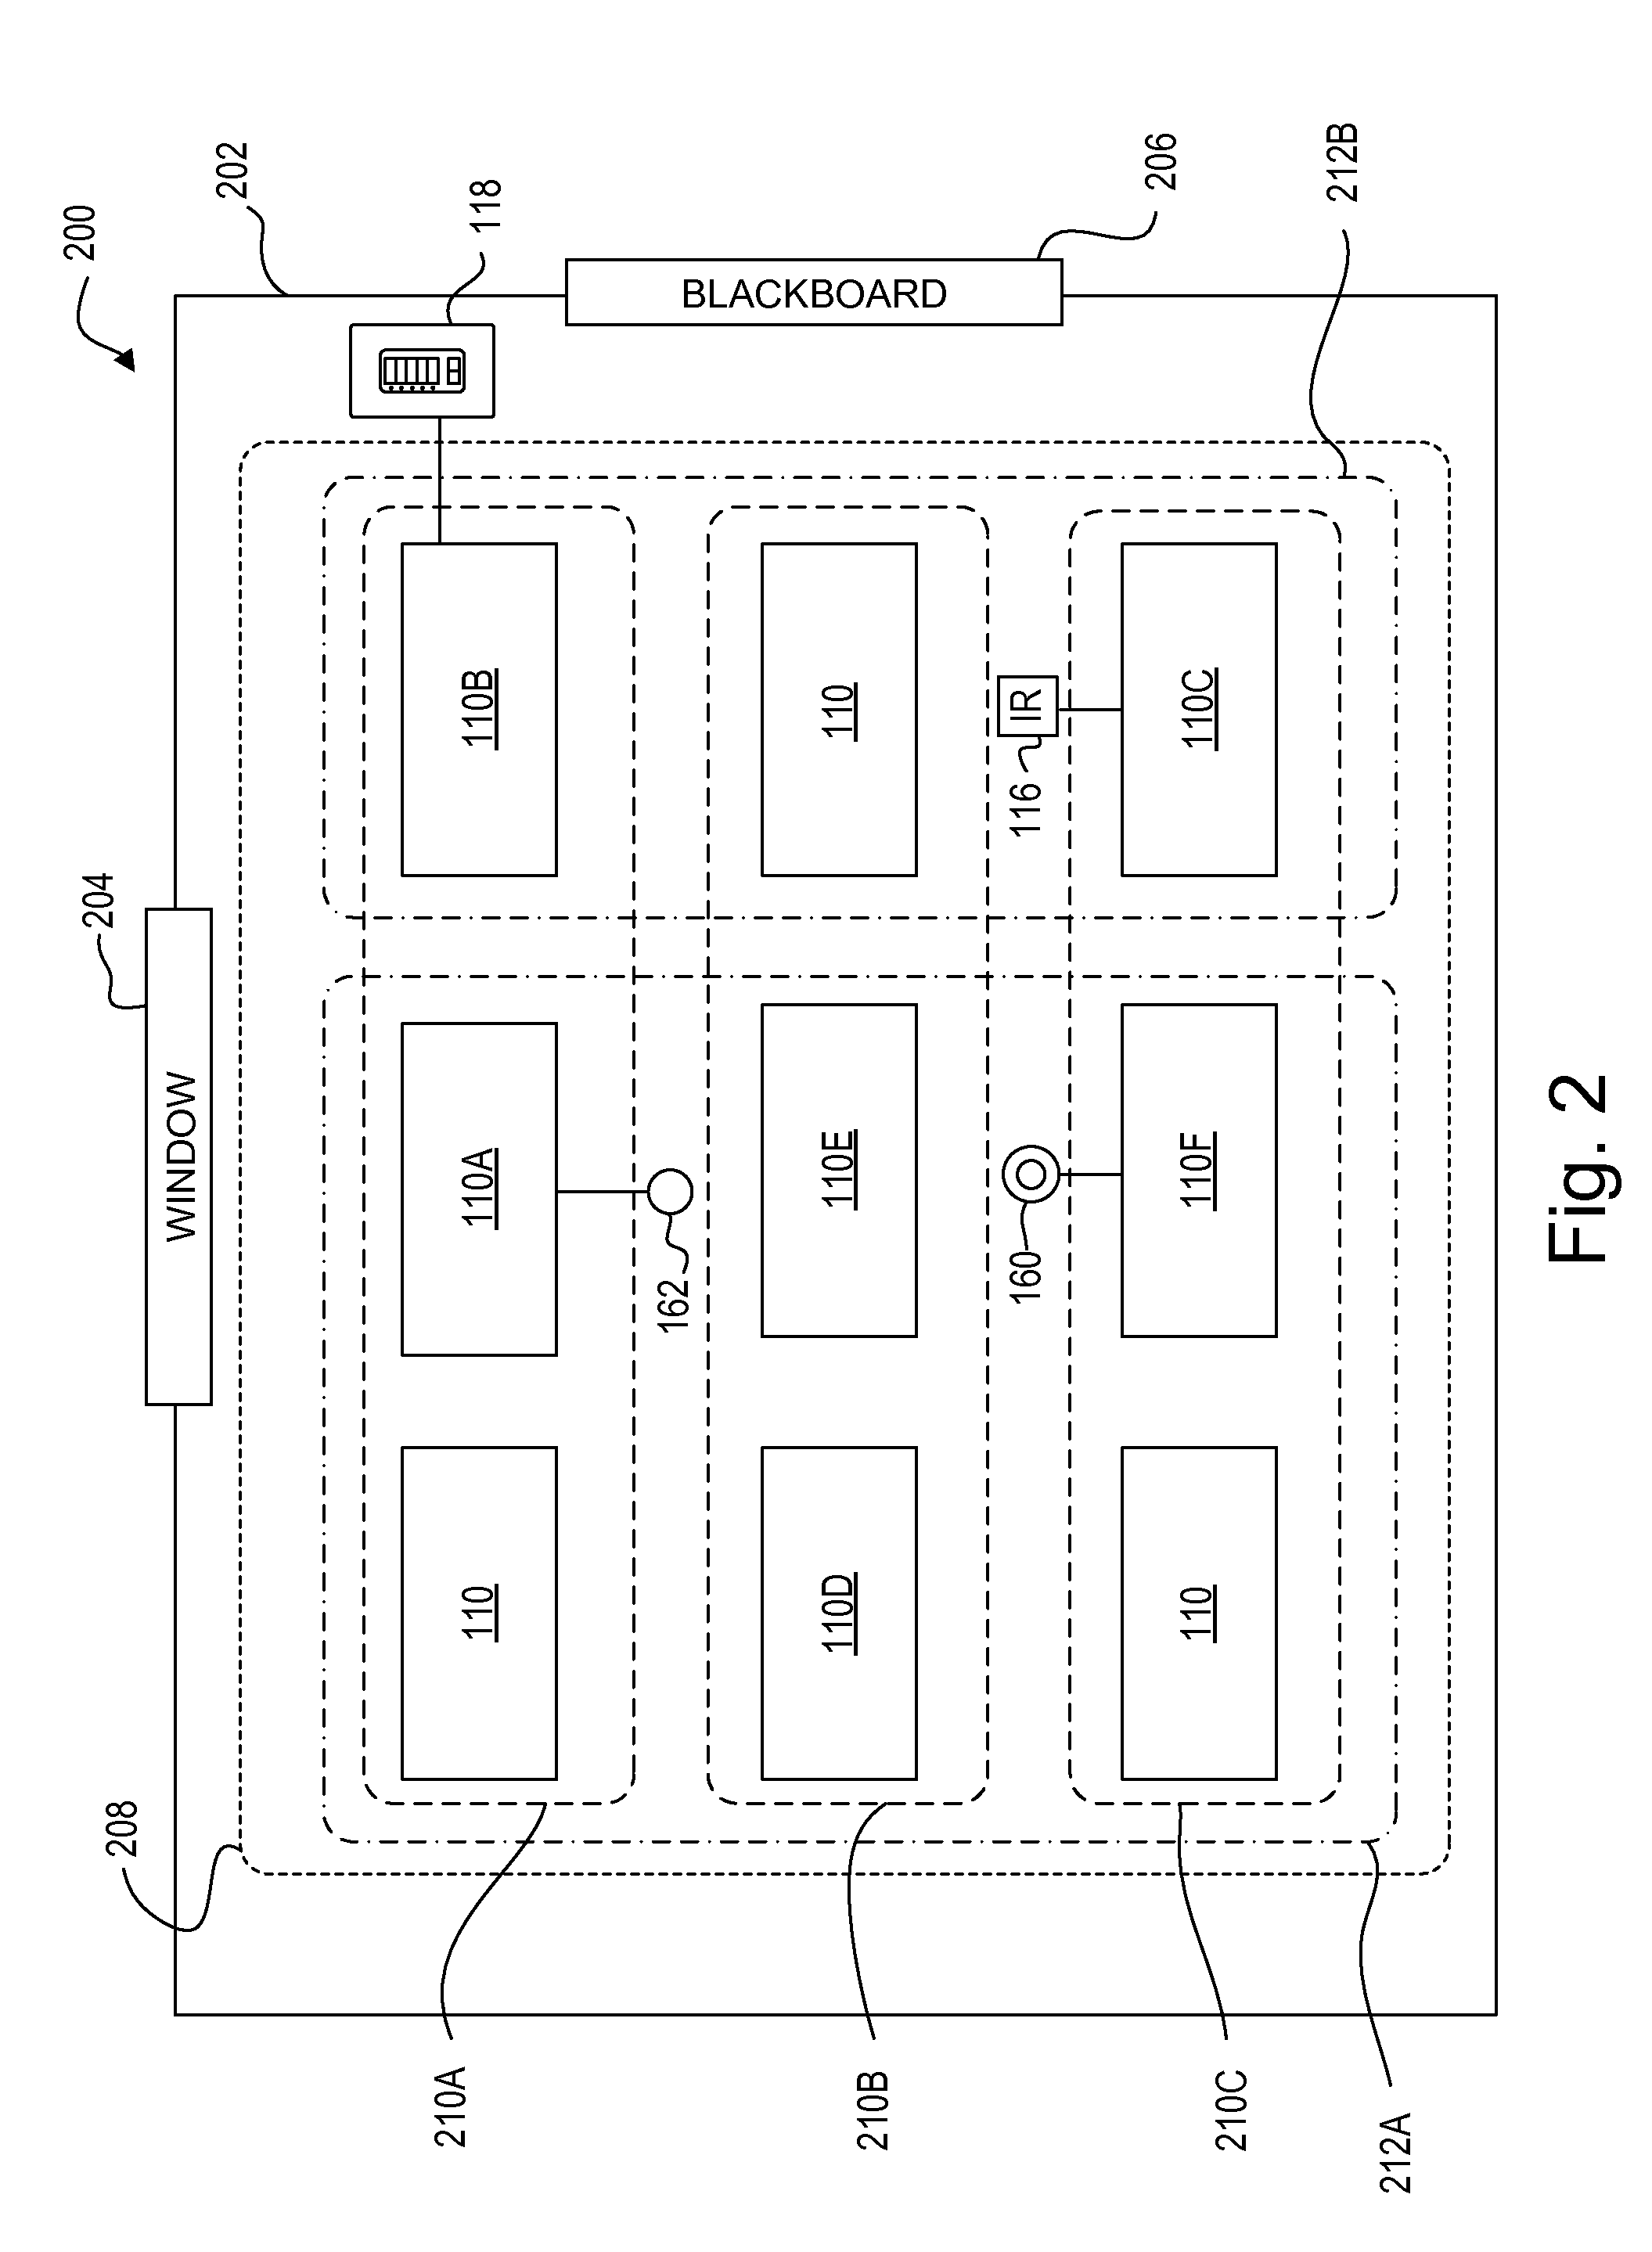 Method of semi-automatic ballast replacement